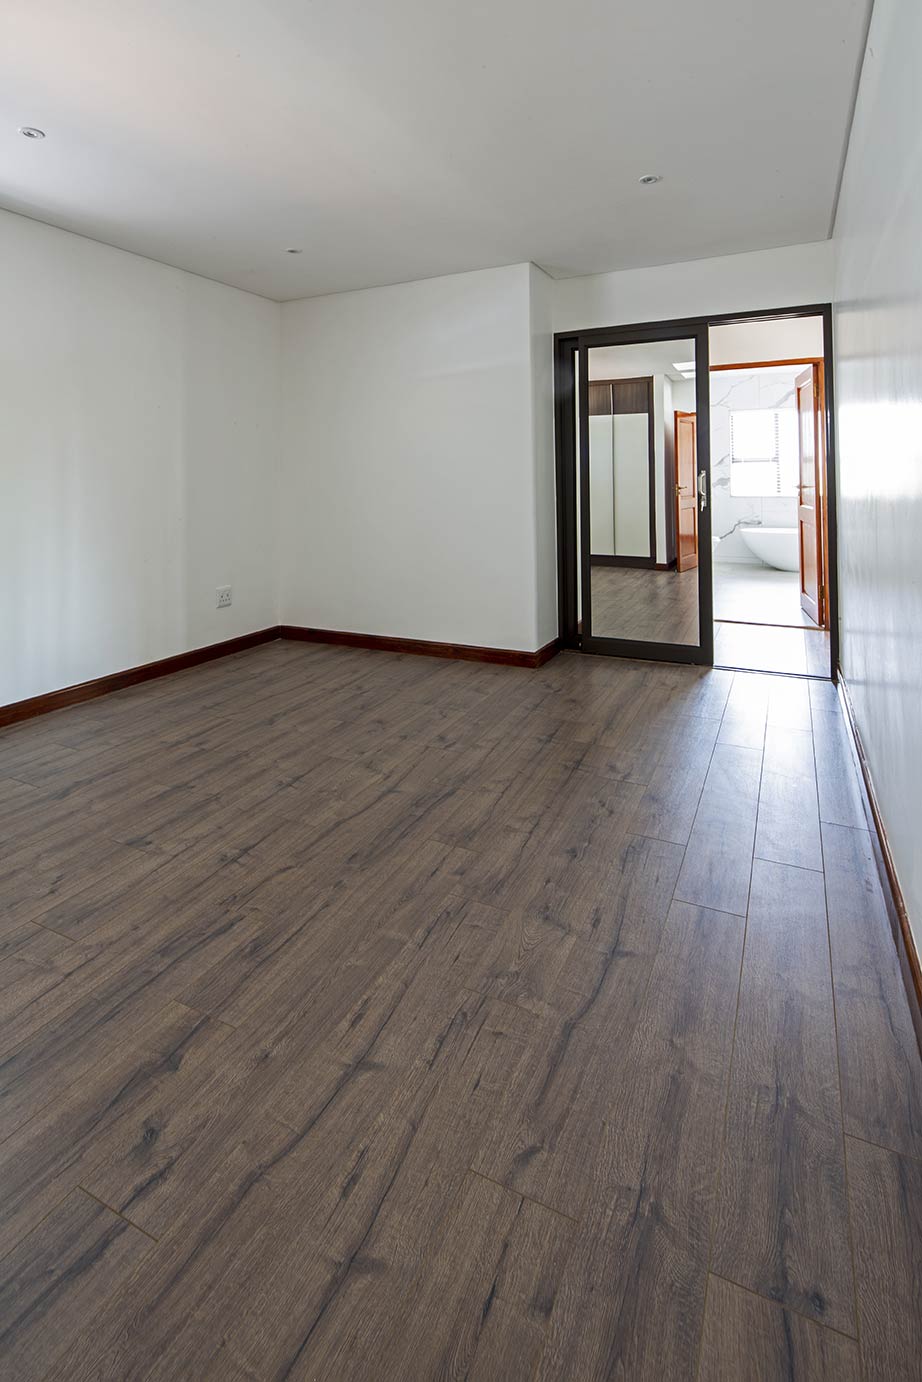 AGT selge laminate flooring in newly renovated home